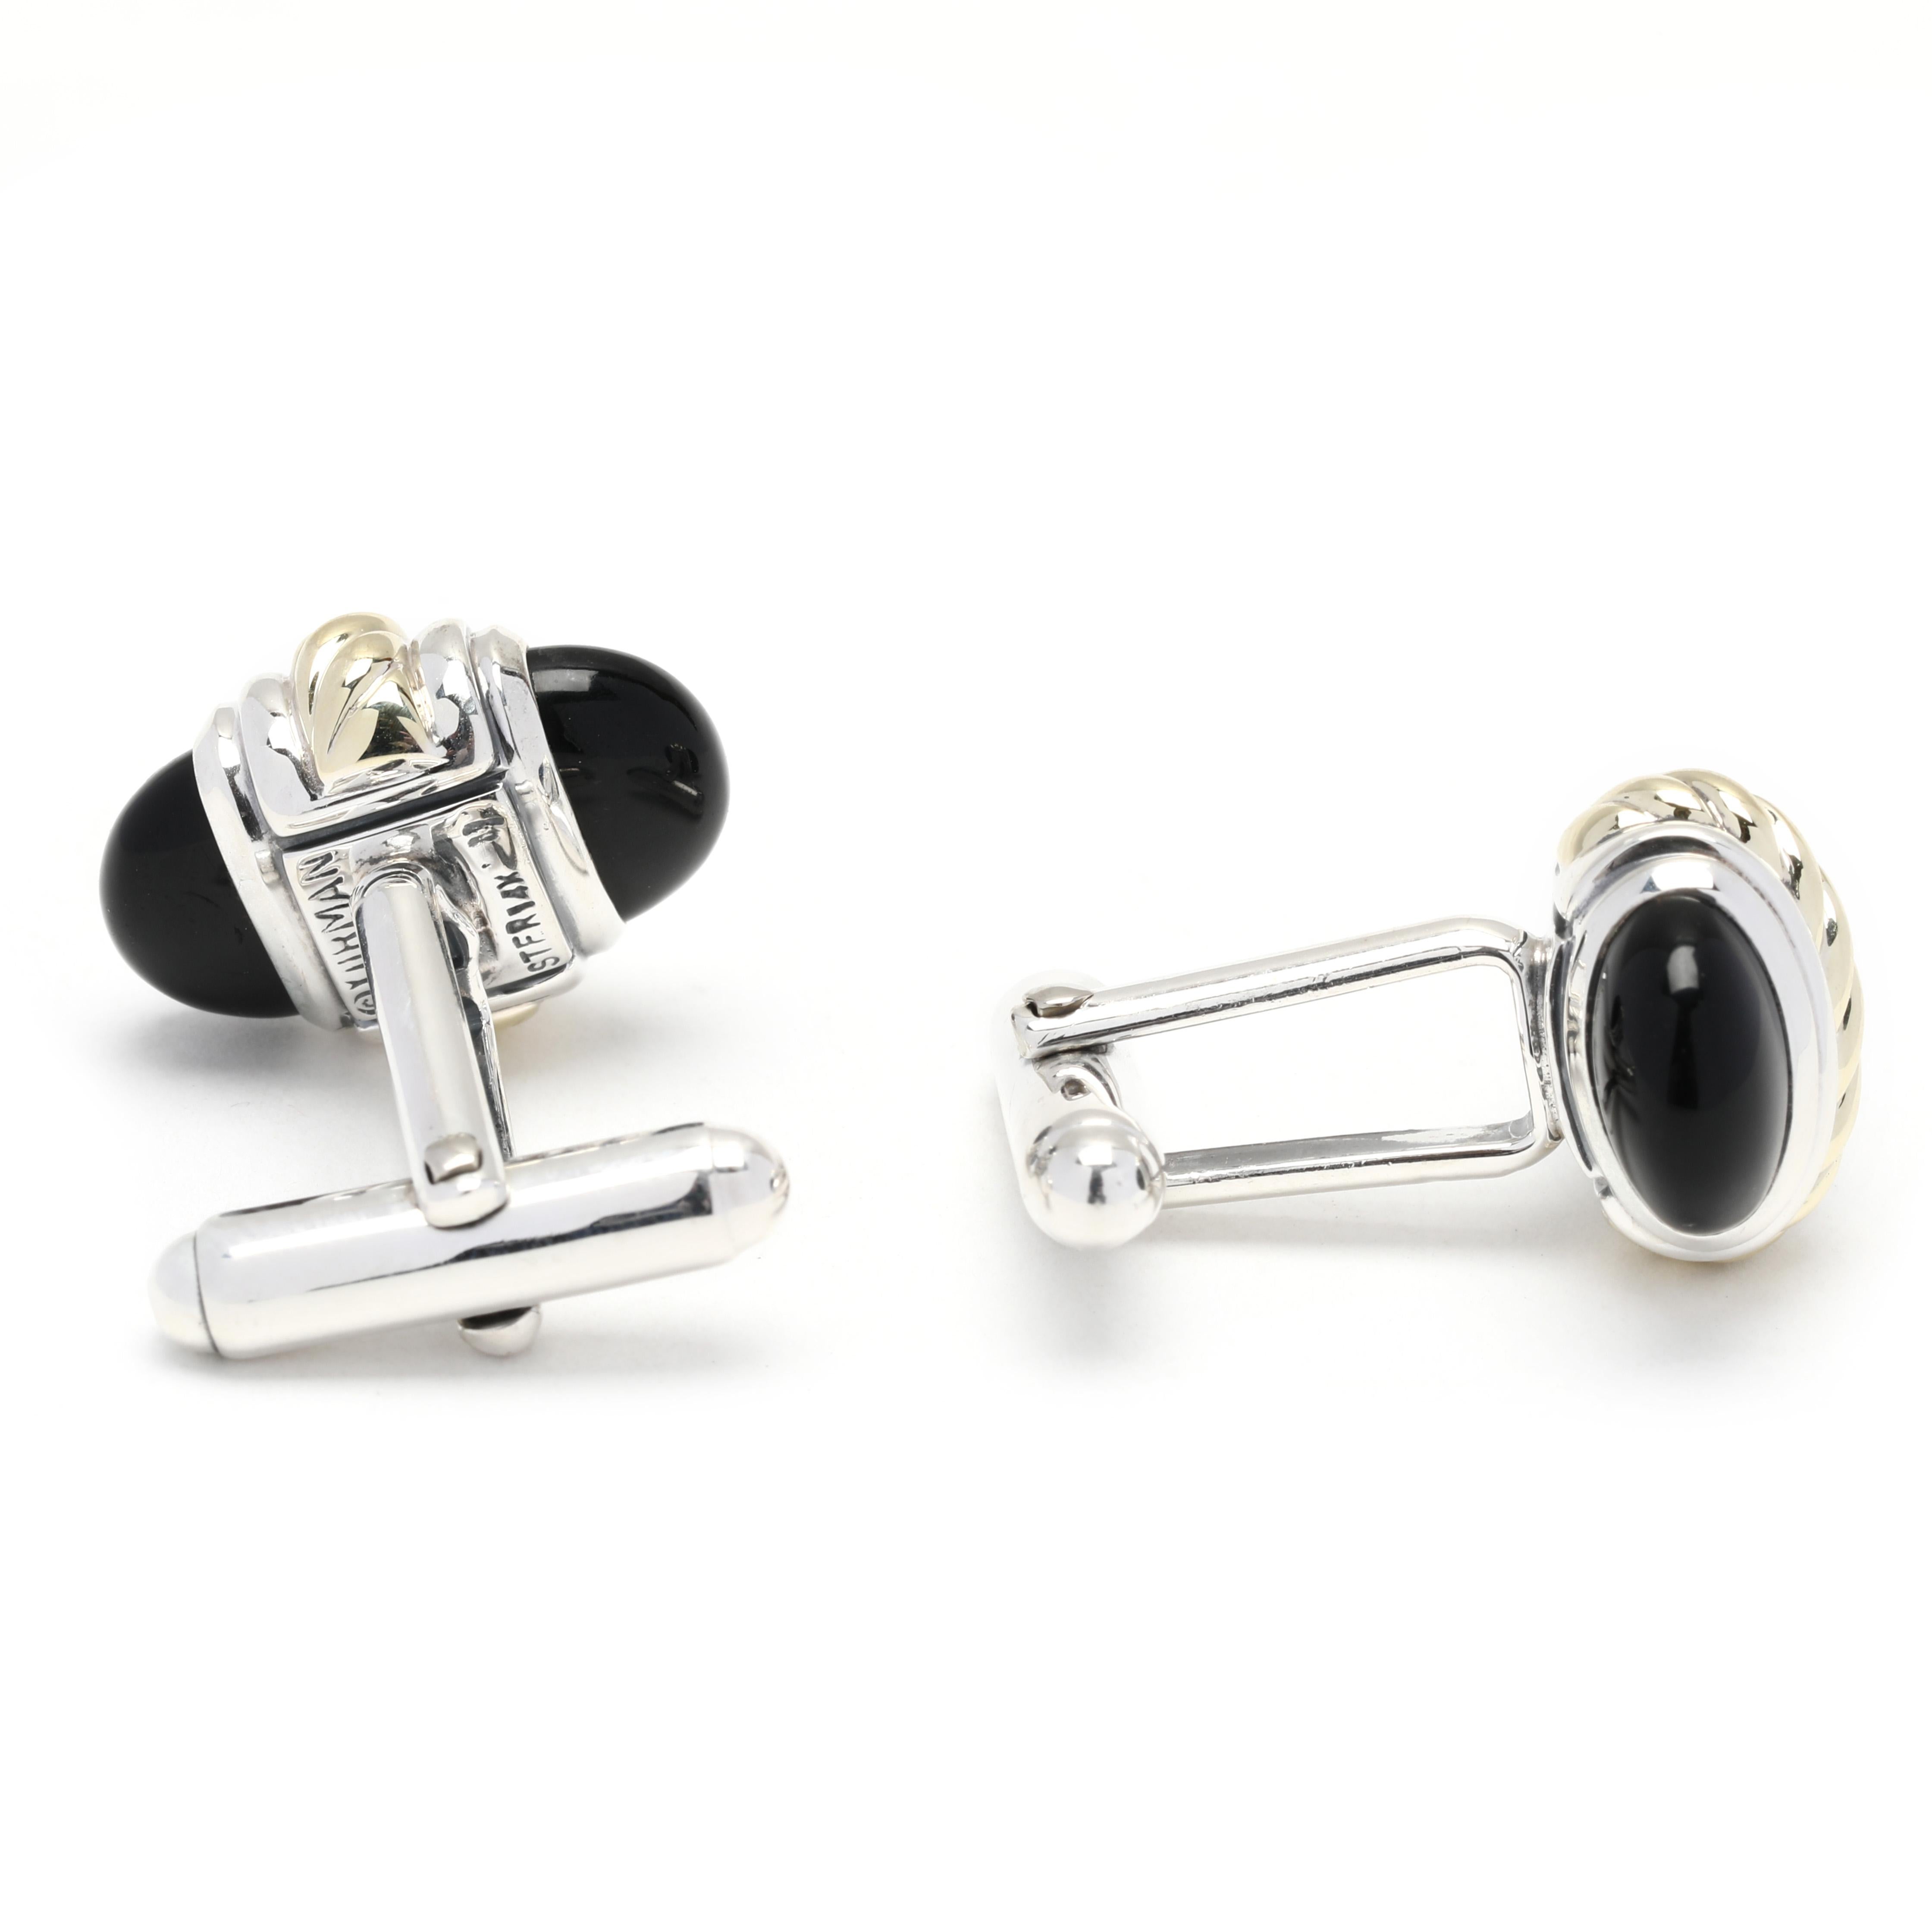 These David Yurman Thoroughbred Black Onyx Cufflinks are a timeless and stylish addition to any wardrobe! Crafted in luxurious 14K yellow gold and sterling silver, these cufflinks feature an oval shaped black onyx center surrounded by an intricate